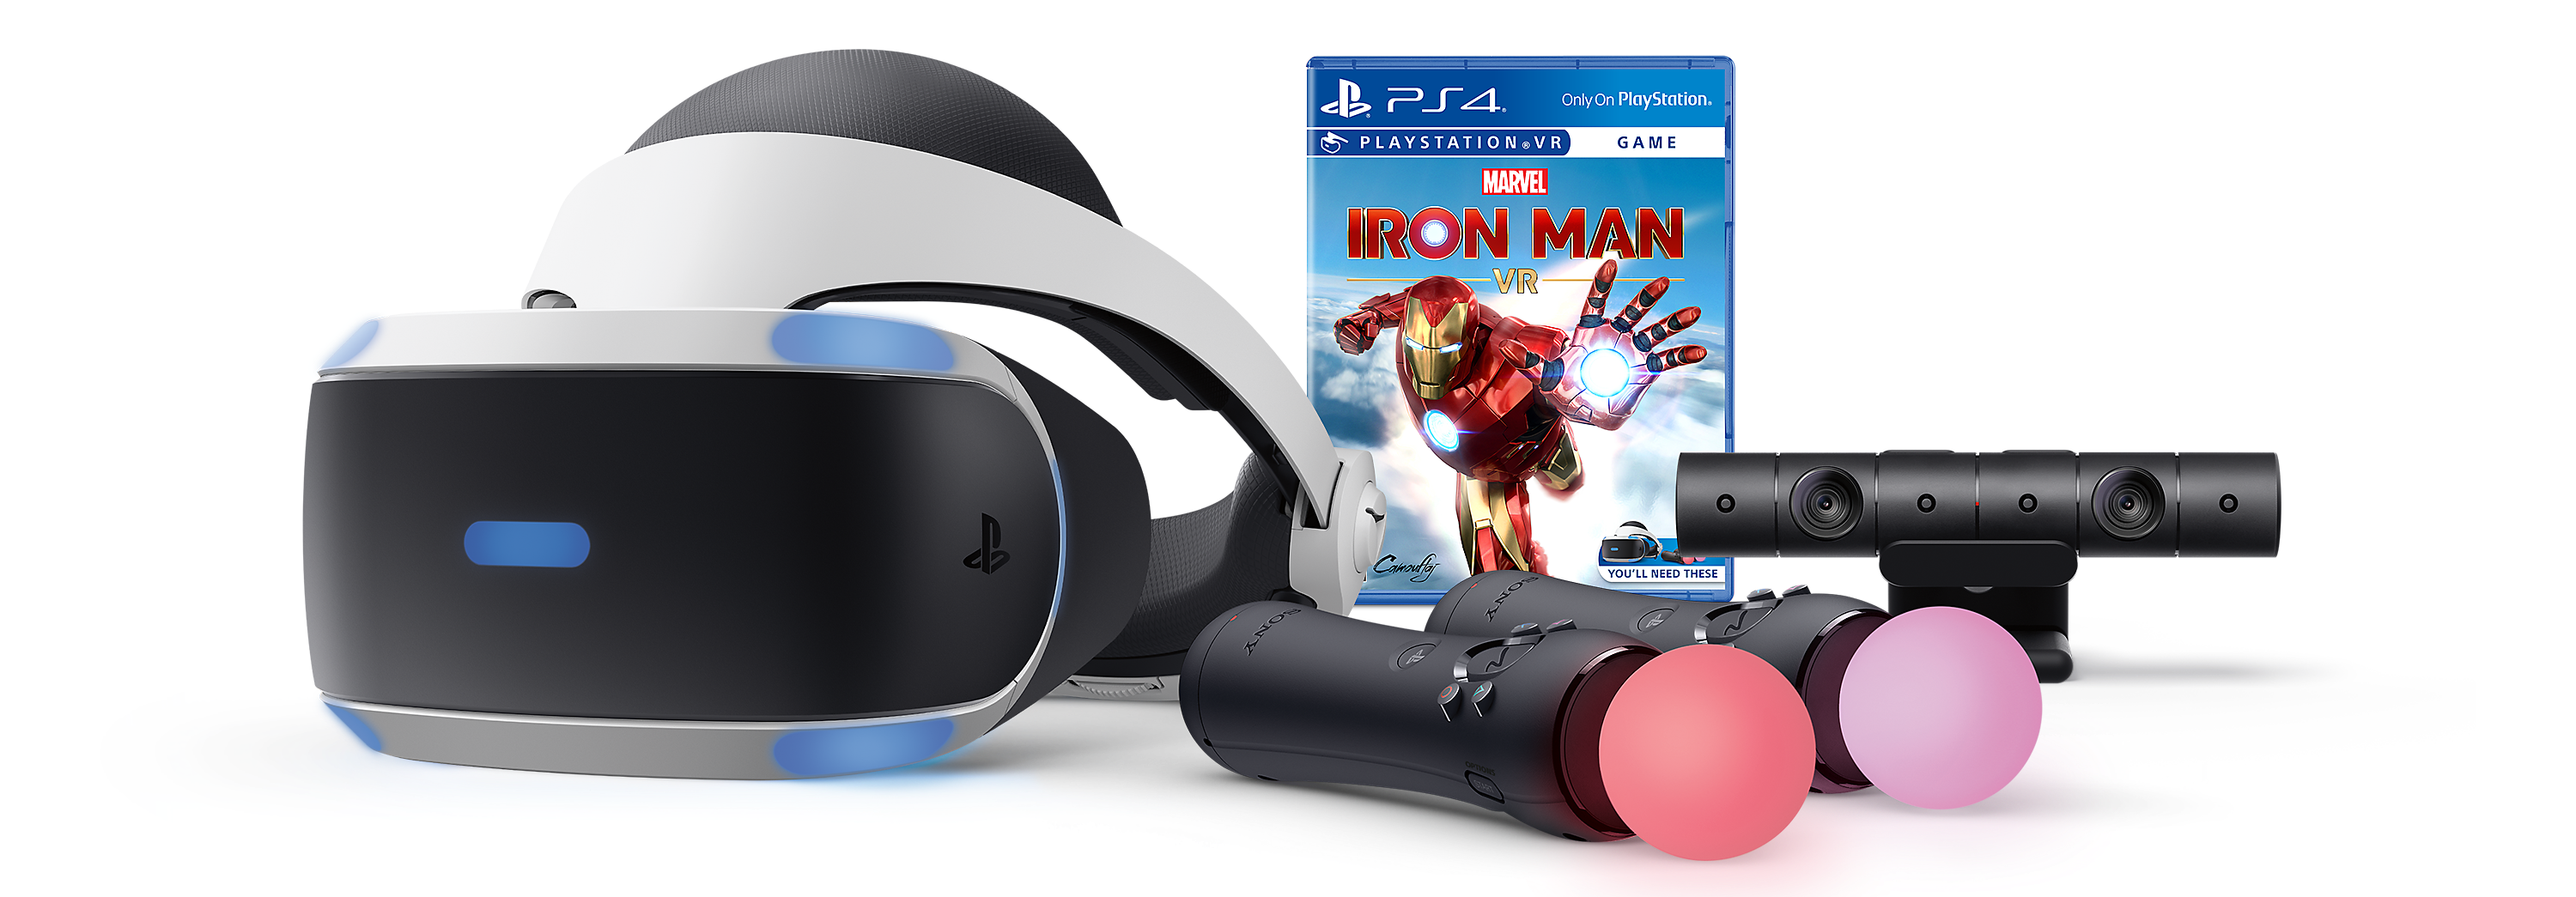 Playstation Vr Over 500 Games And Experiences Feel Them All